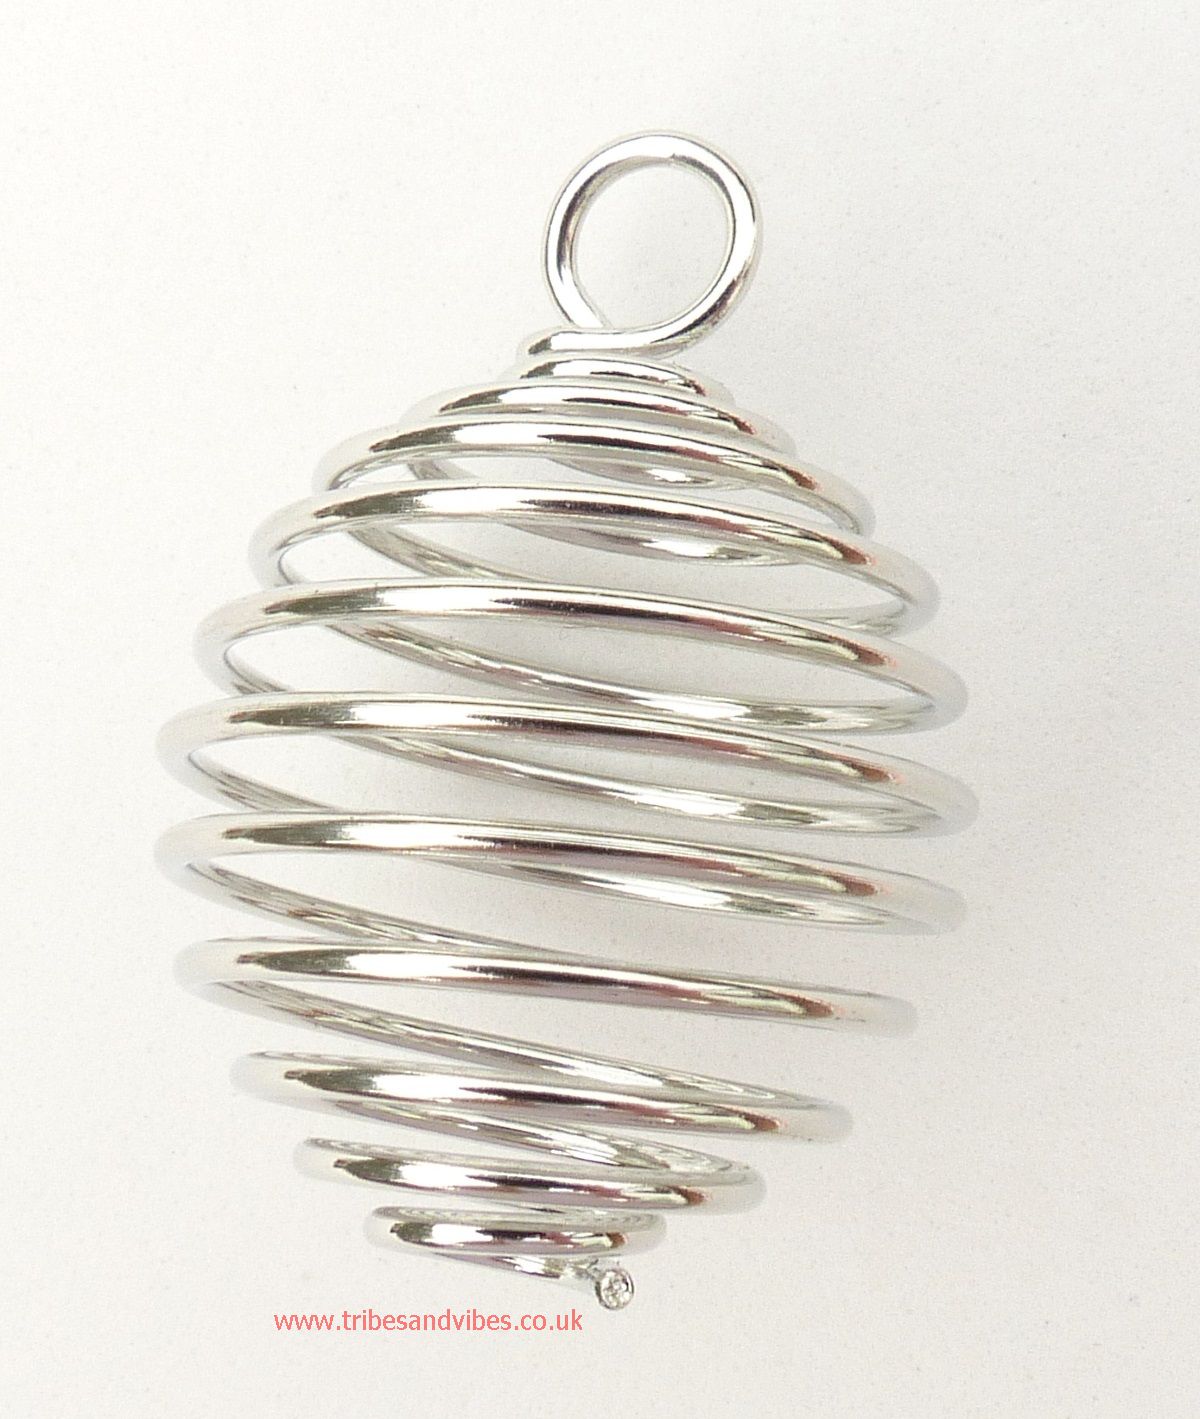 One Crystal Cage, Crystal Holding Necklace, Crystal Cage Necklace, Bead Cage,  Spiral Bead Cages, Interchangeable Pendant, Crystal Crate -  Norway